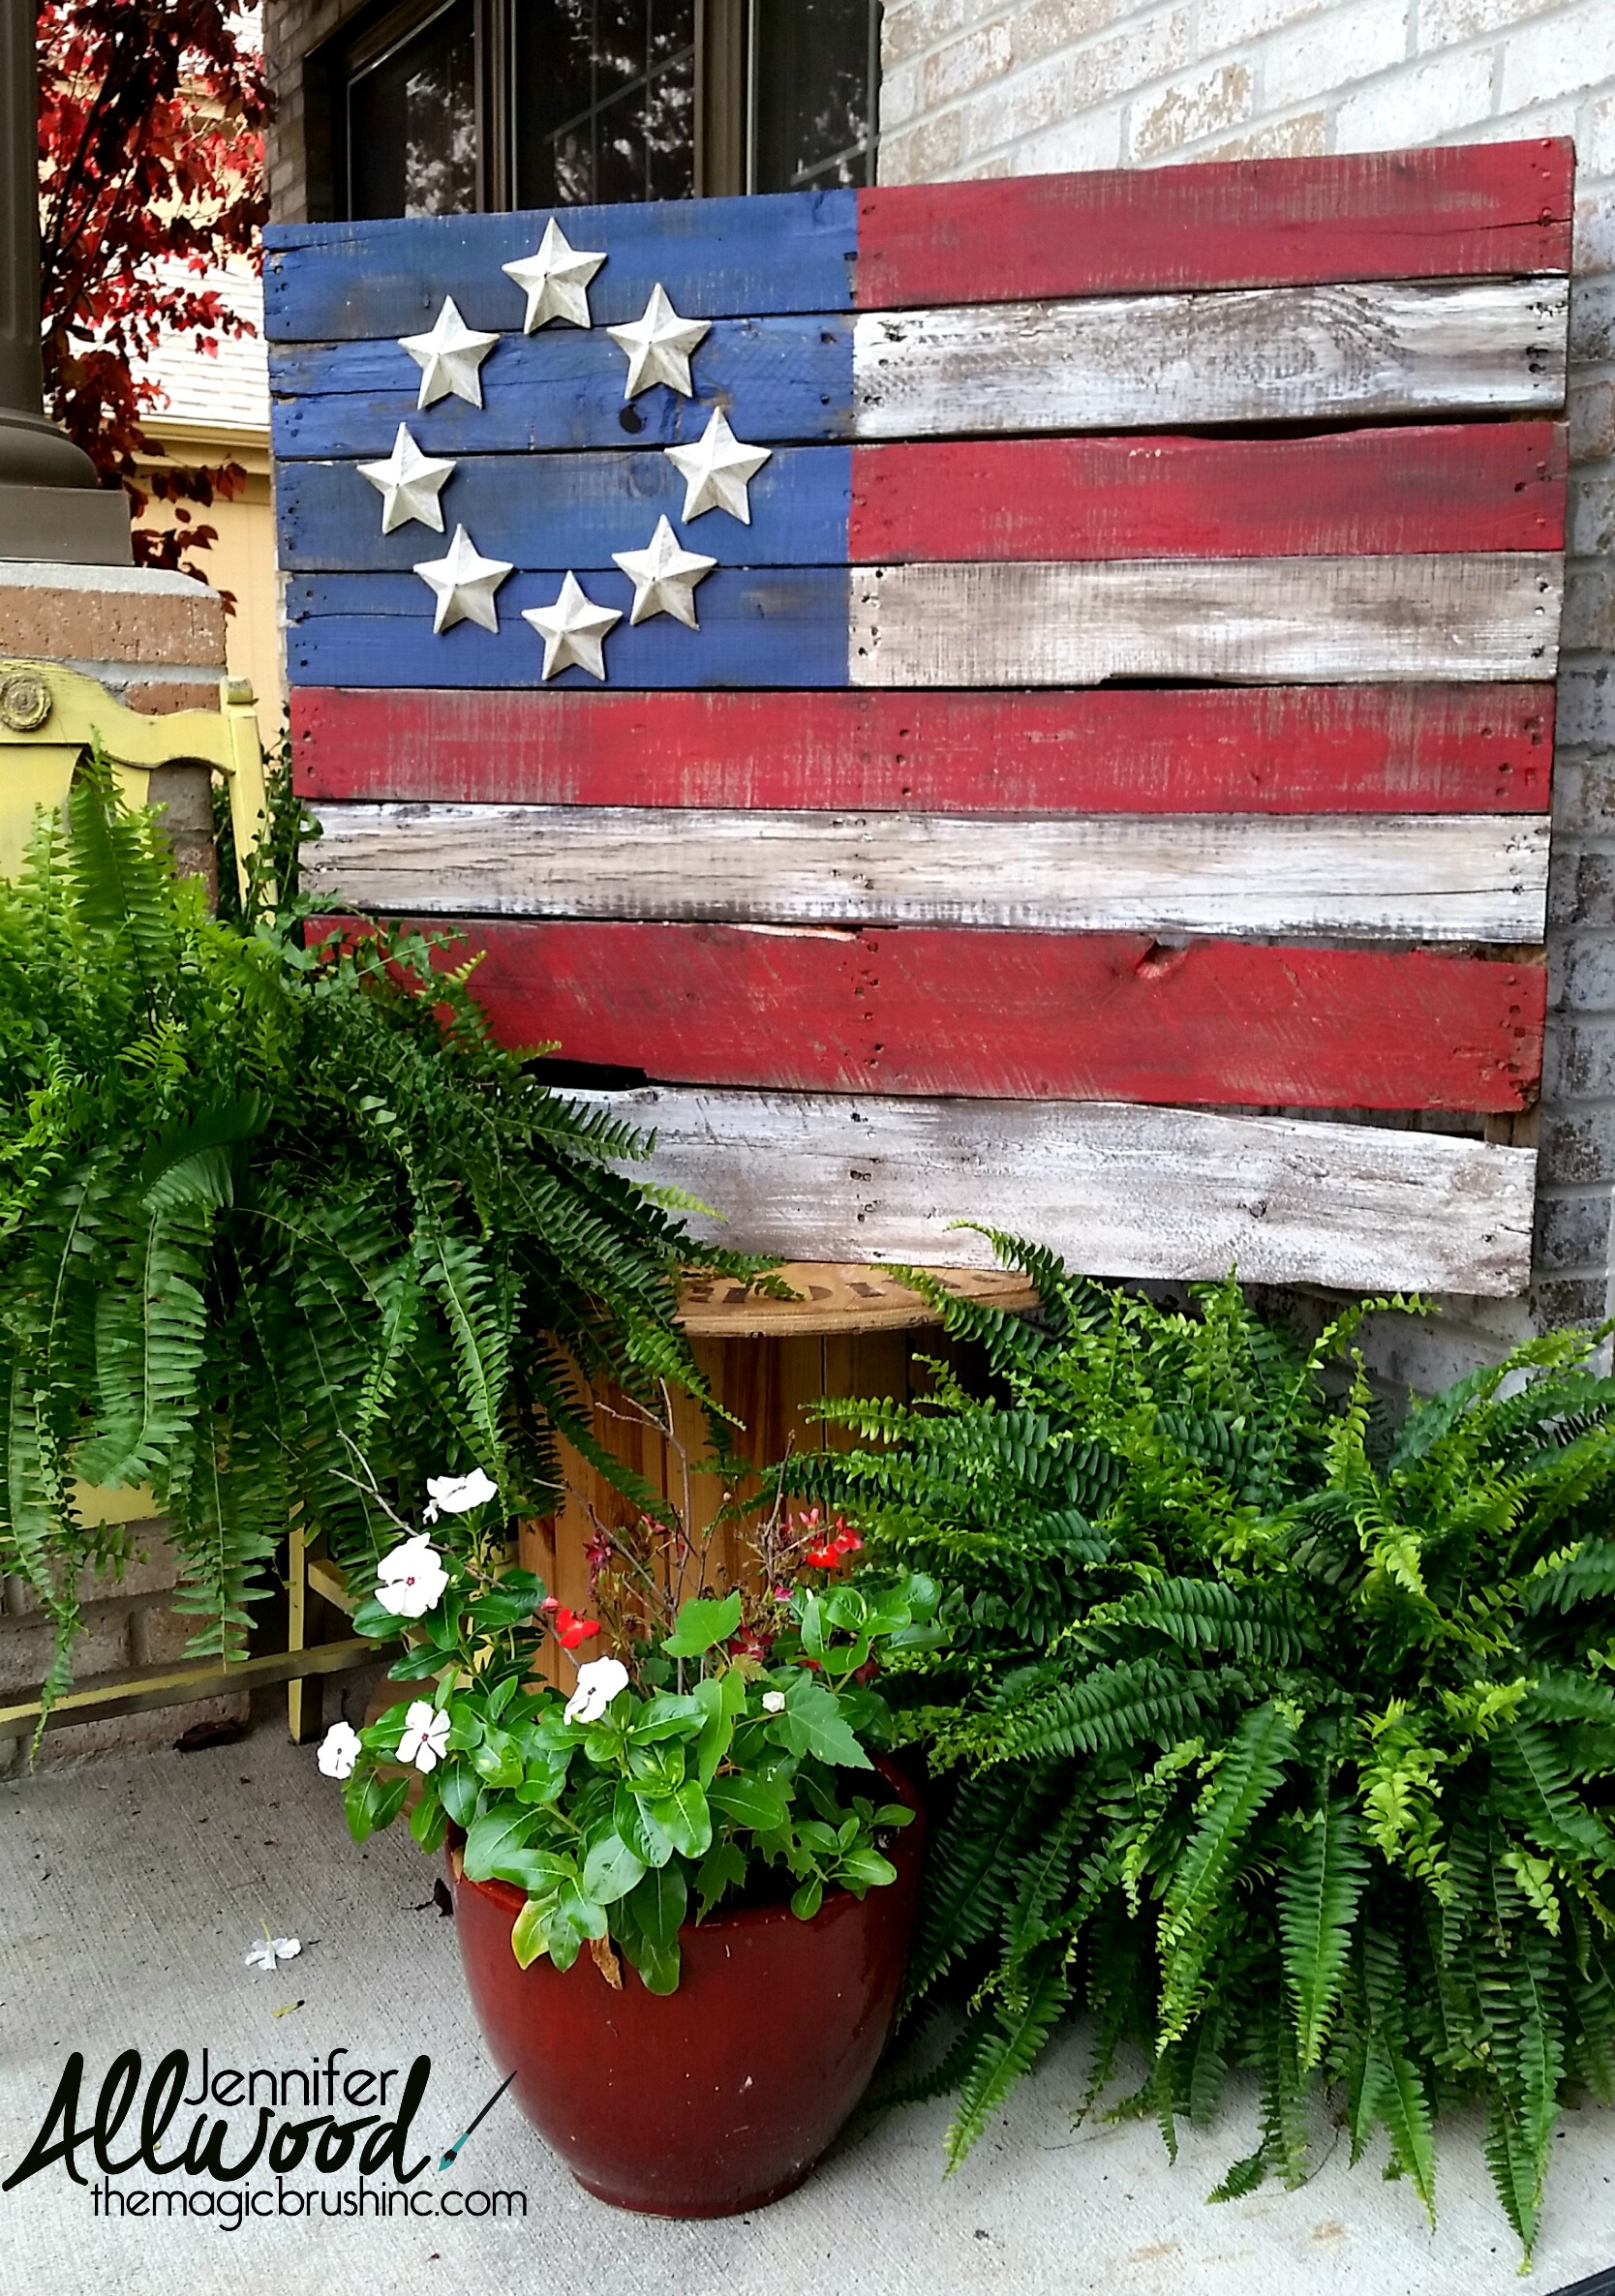 Details about   AGD Patriotic Decor Tall Wood Pallet American Flag Serve My Country Veteran 